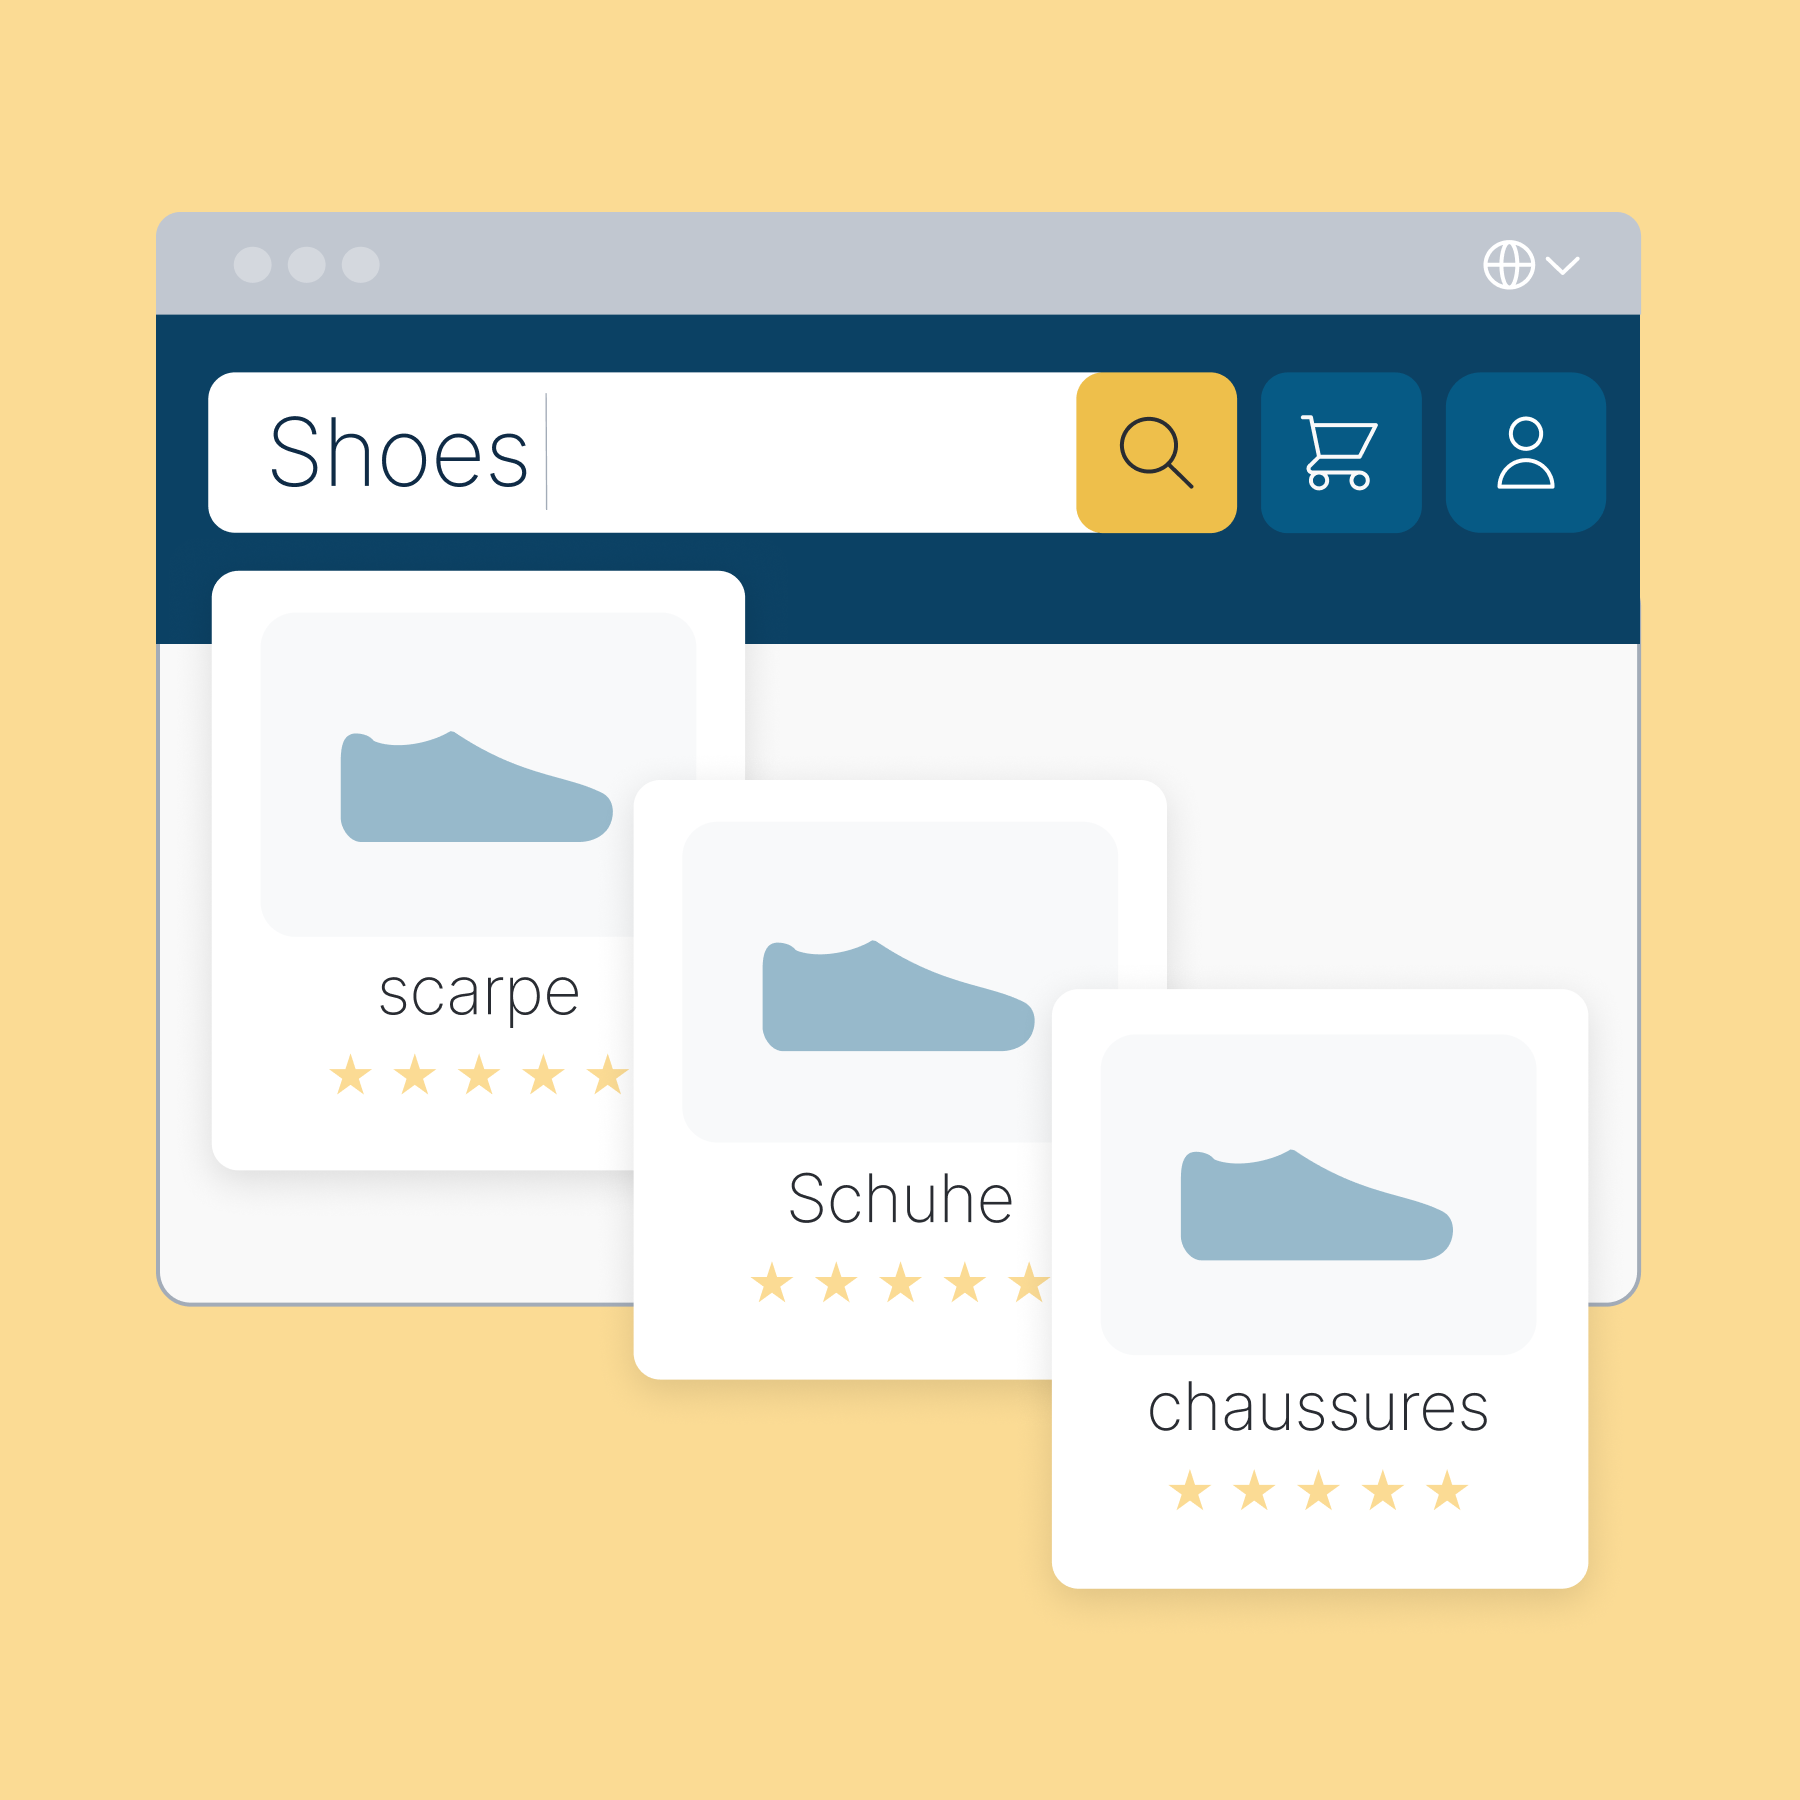 Illustration of marketplace search results for "shoes" in multiple languages